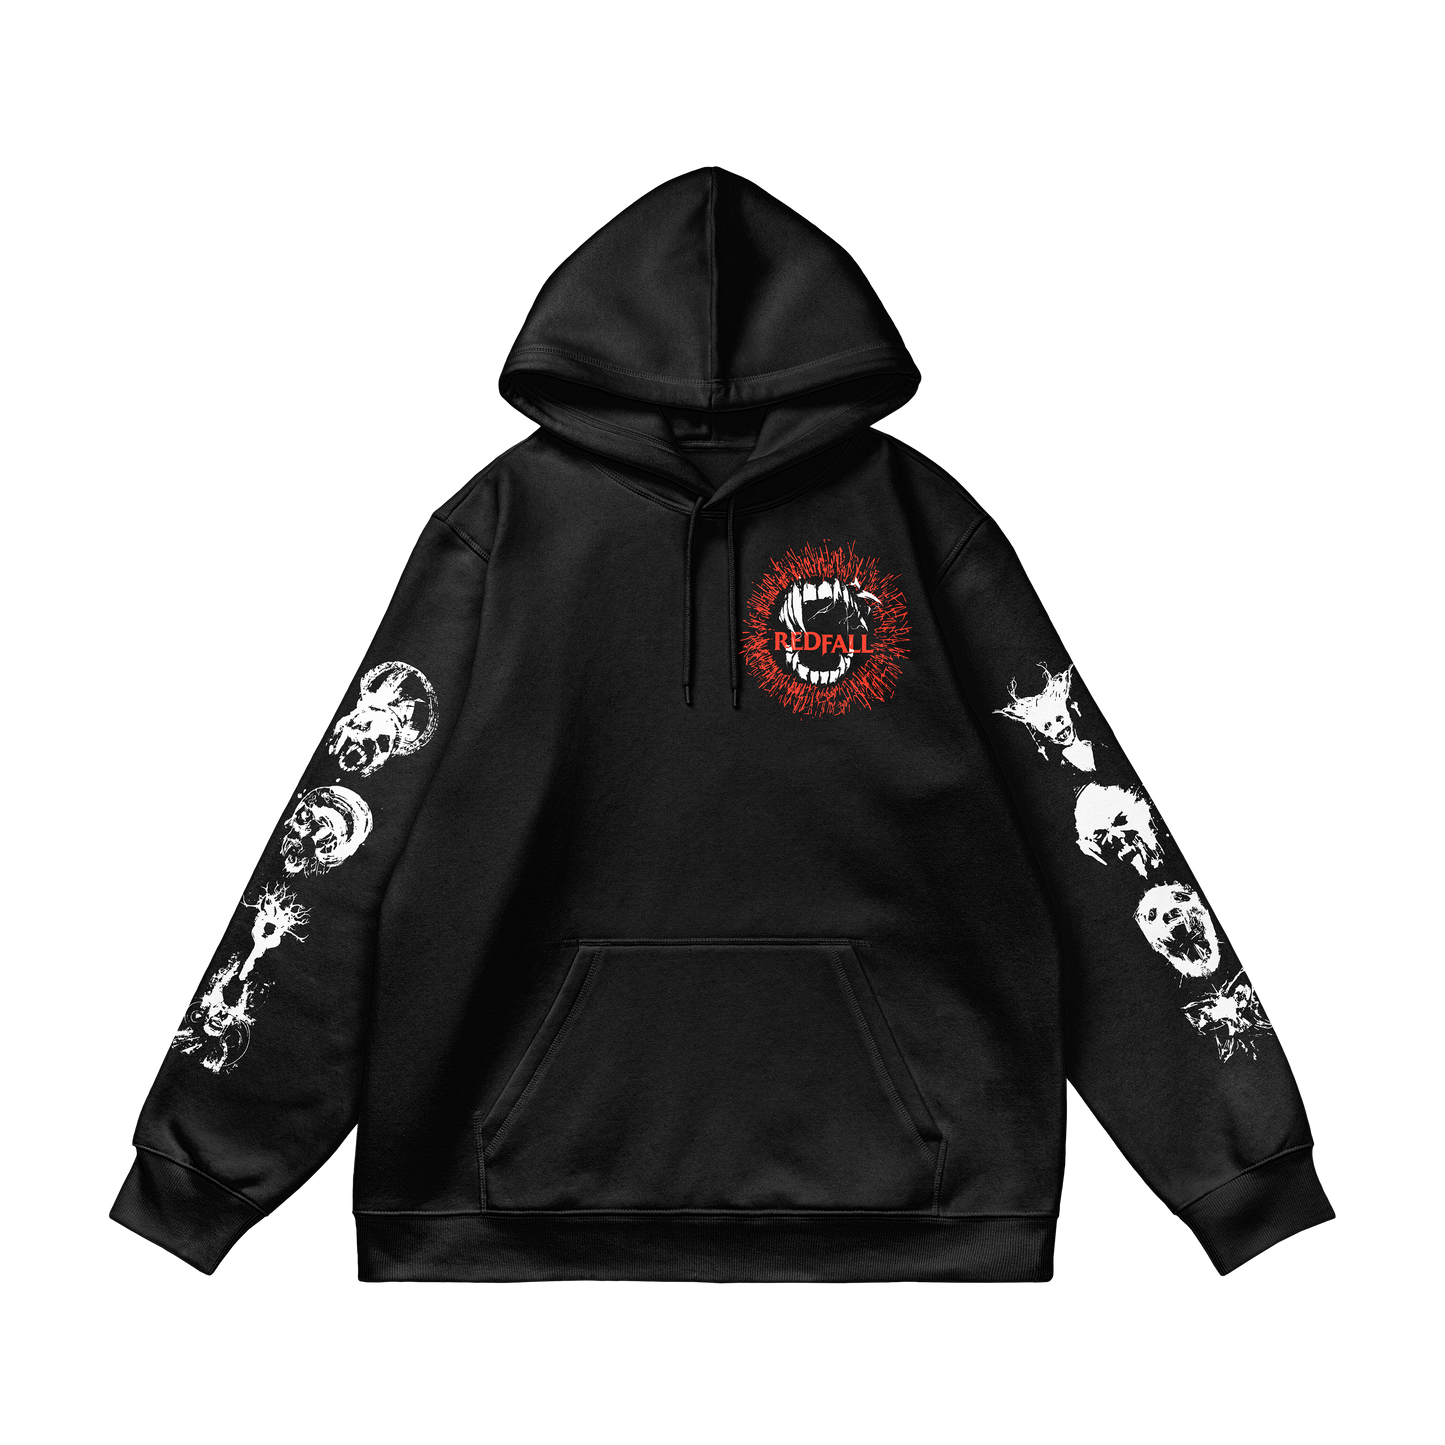 any means necessary shawn coss red fall game xbox microsoft bethesda studios vampire god pullover hoodie black FRONT